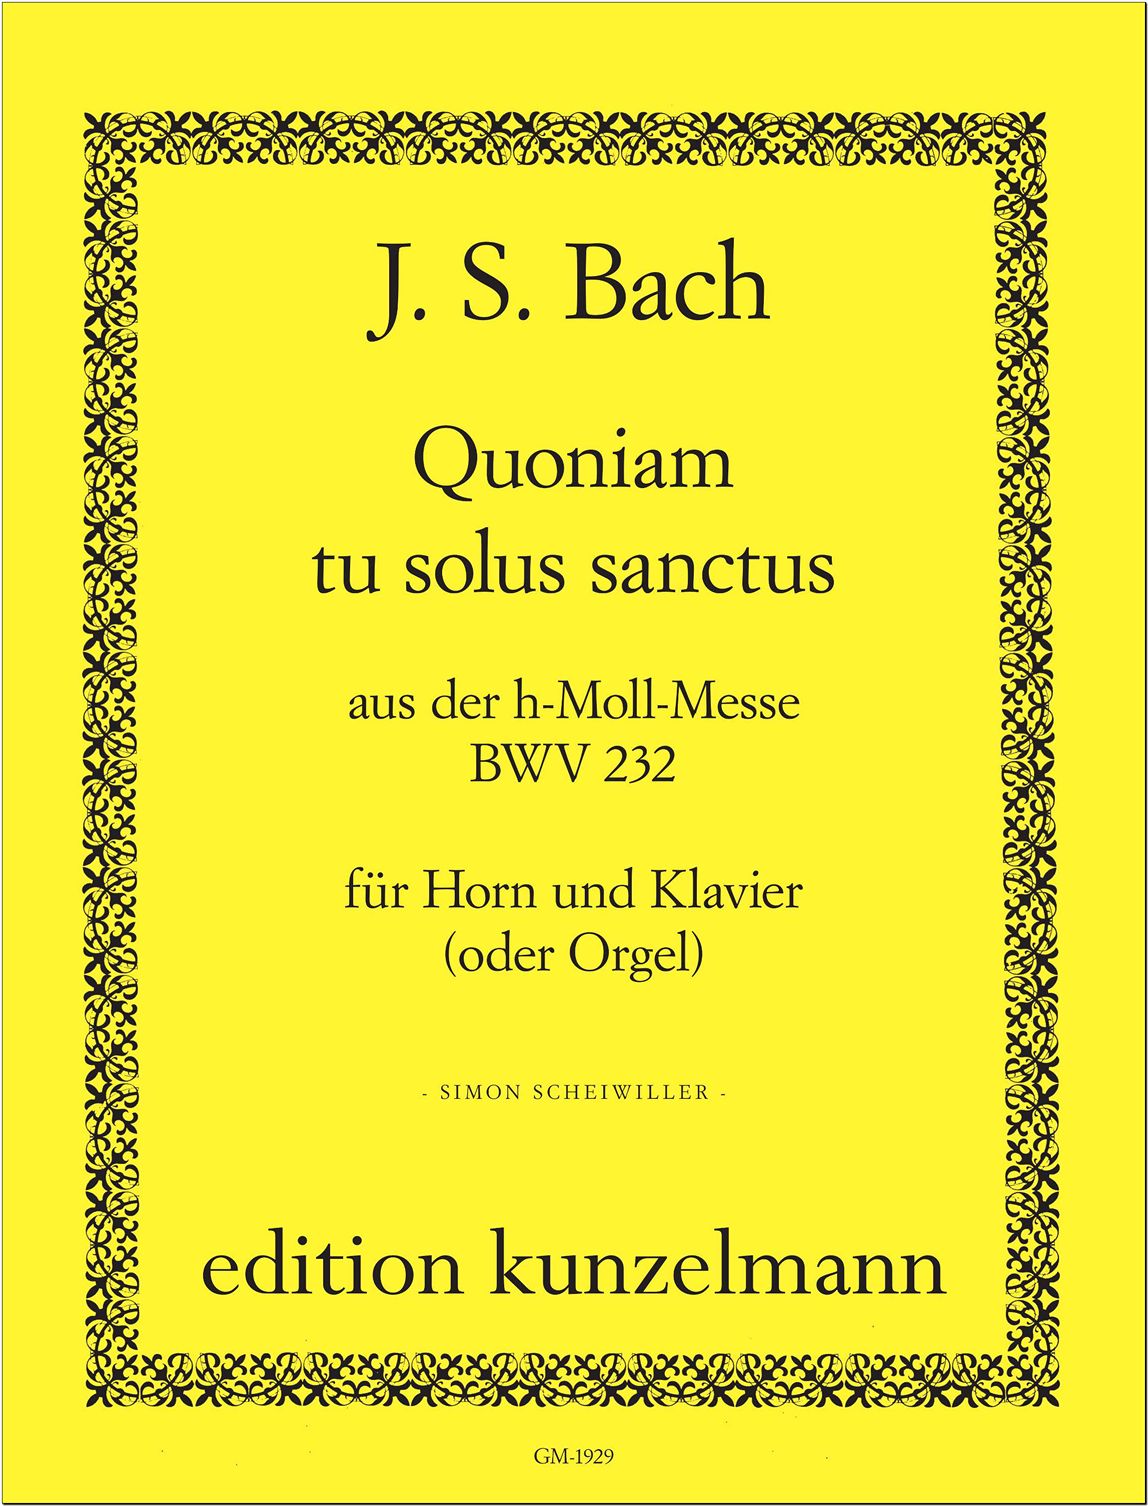 Bach: Quoniam tu solus sanctus from Mass in B Minor, BWV 232 (arr. for horn)